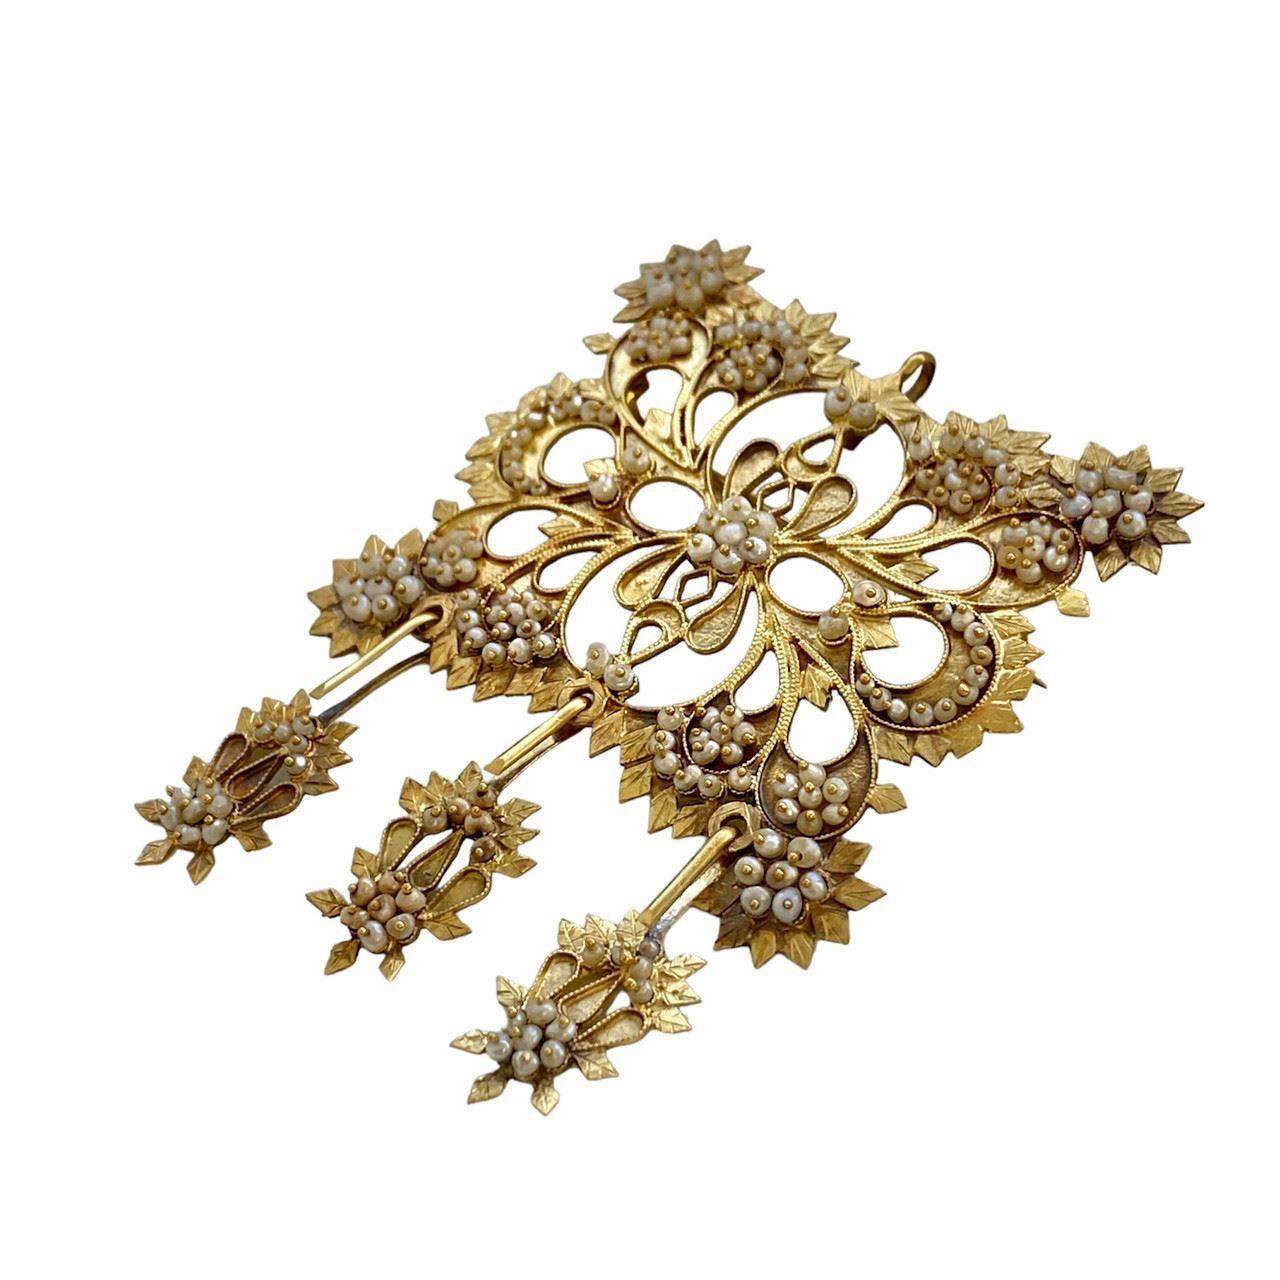 Specifications:

    Antique
    Metal: 18K Gold
    Weight: 19.83 Gr
    Main Stone: Pearls
    Hallmark: ‘18’
    Sise: 2.3 x 3 inch
